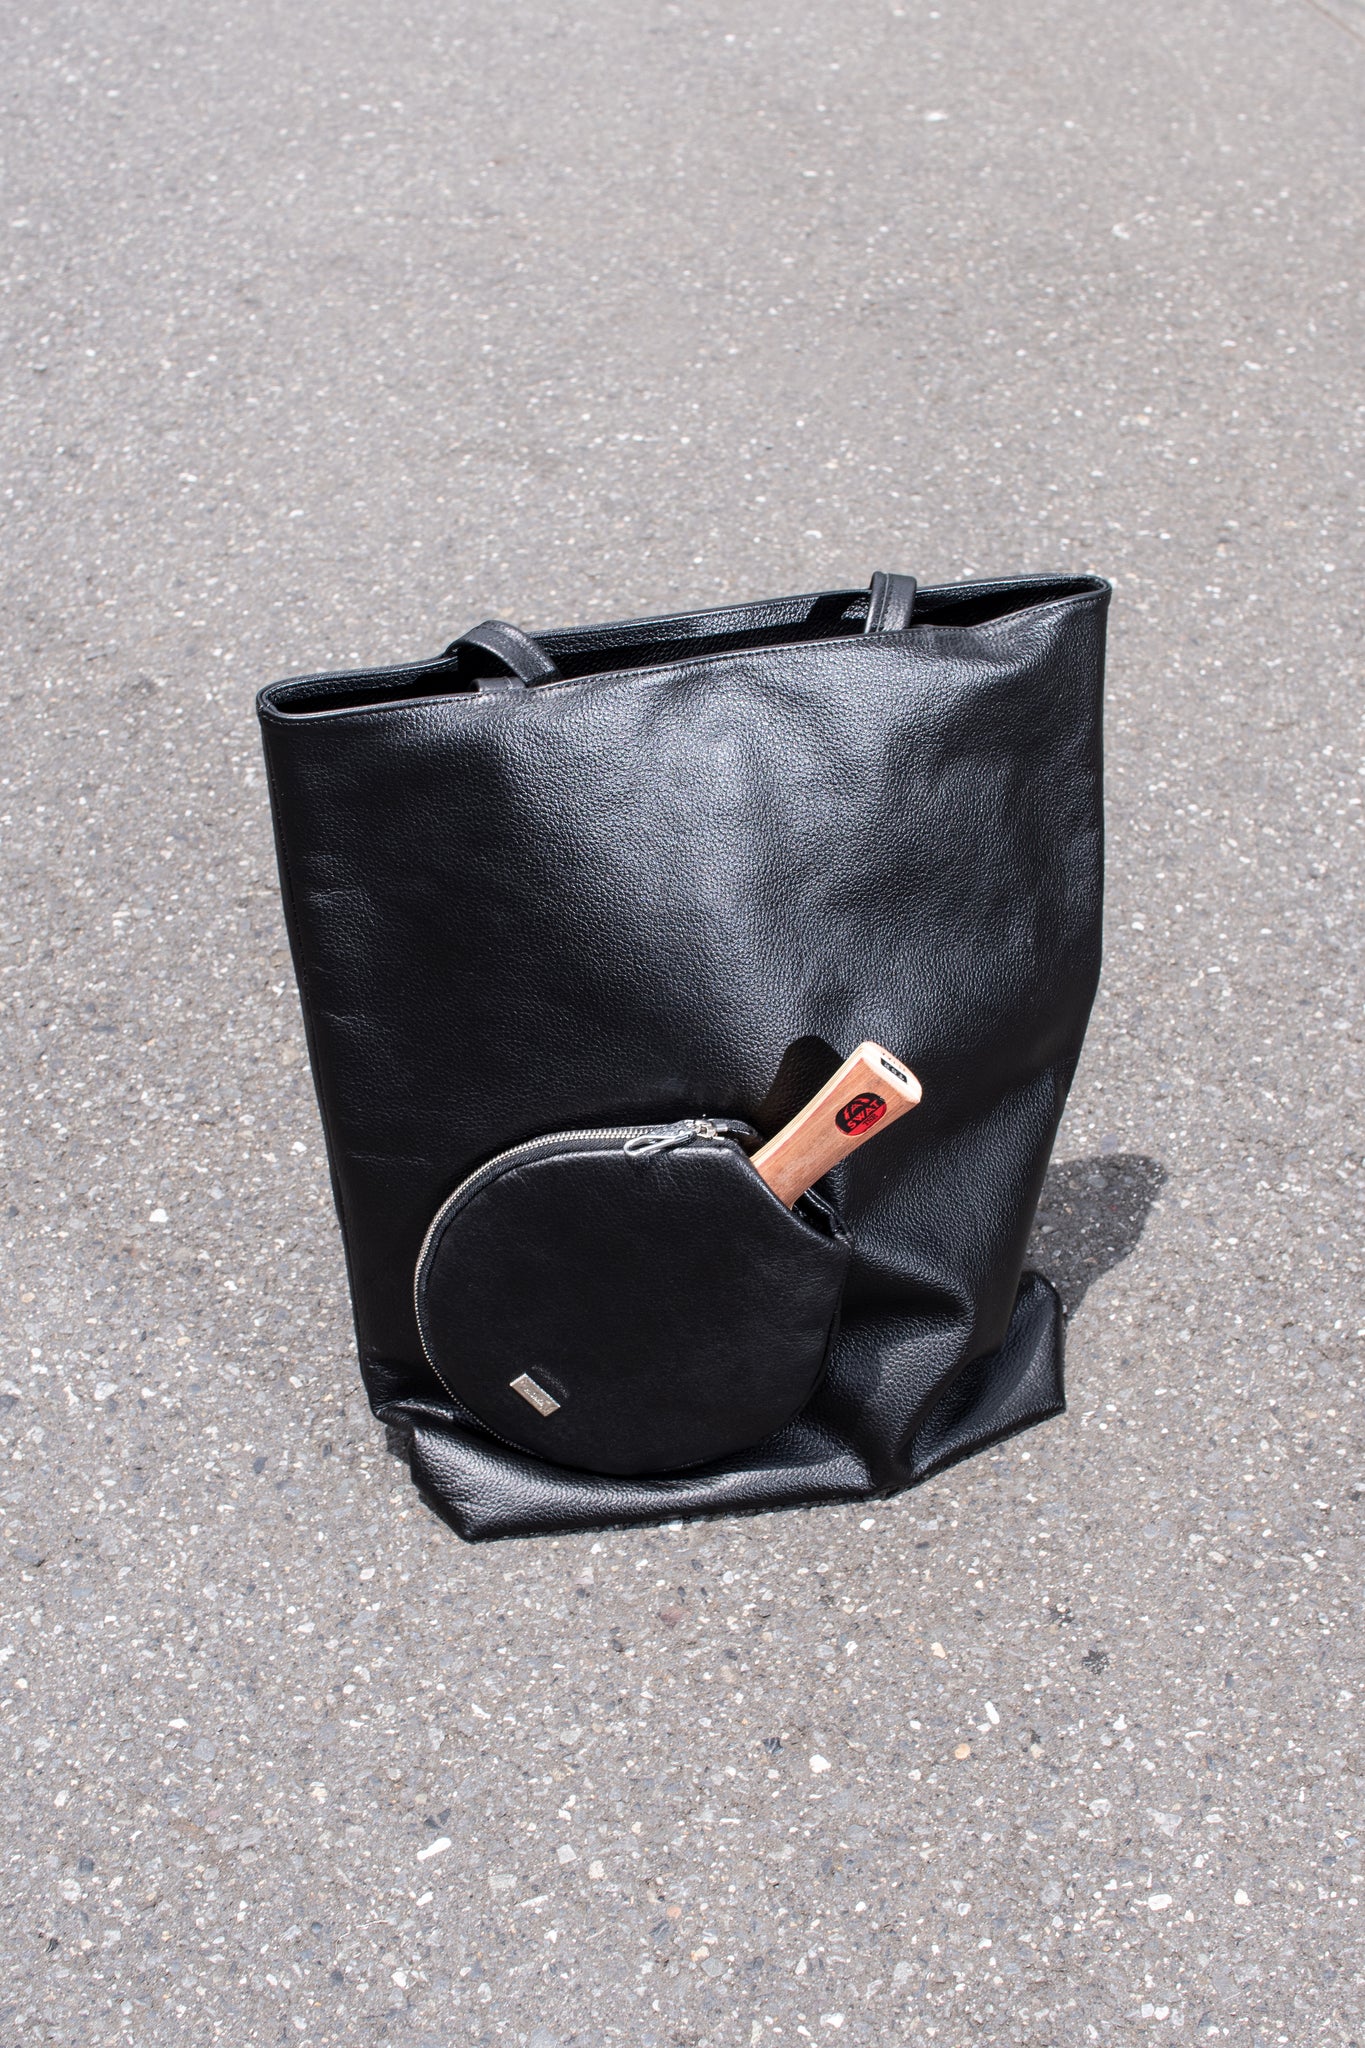 PING-PONG LEATHER TOTE